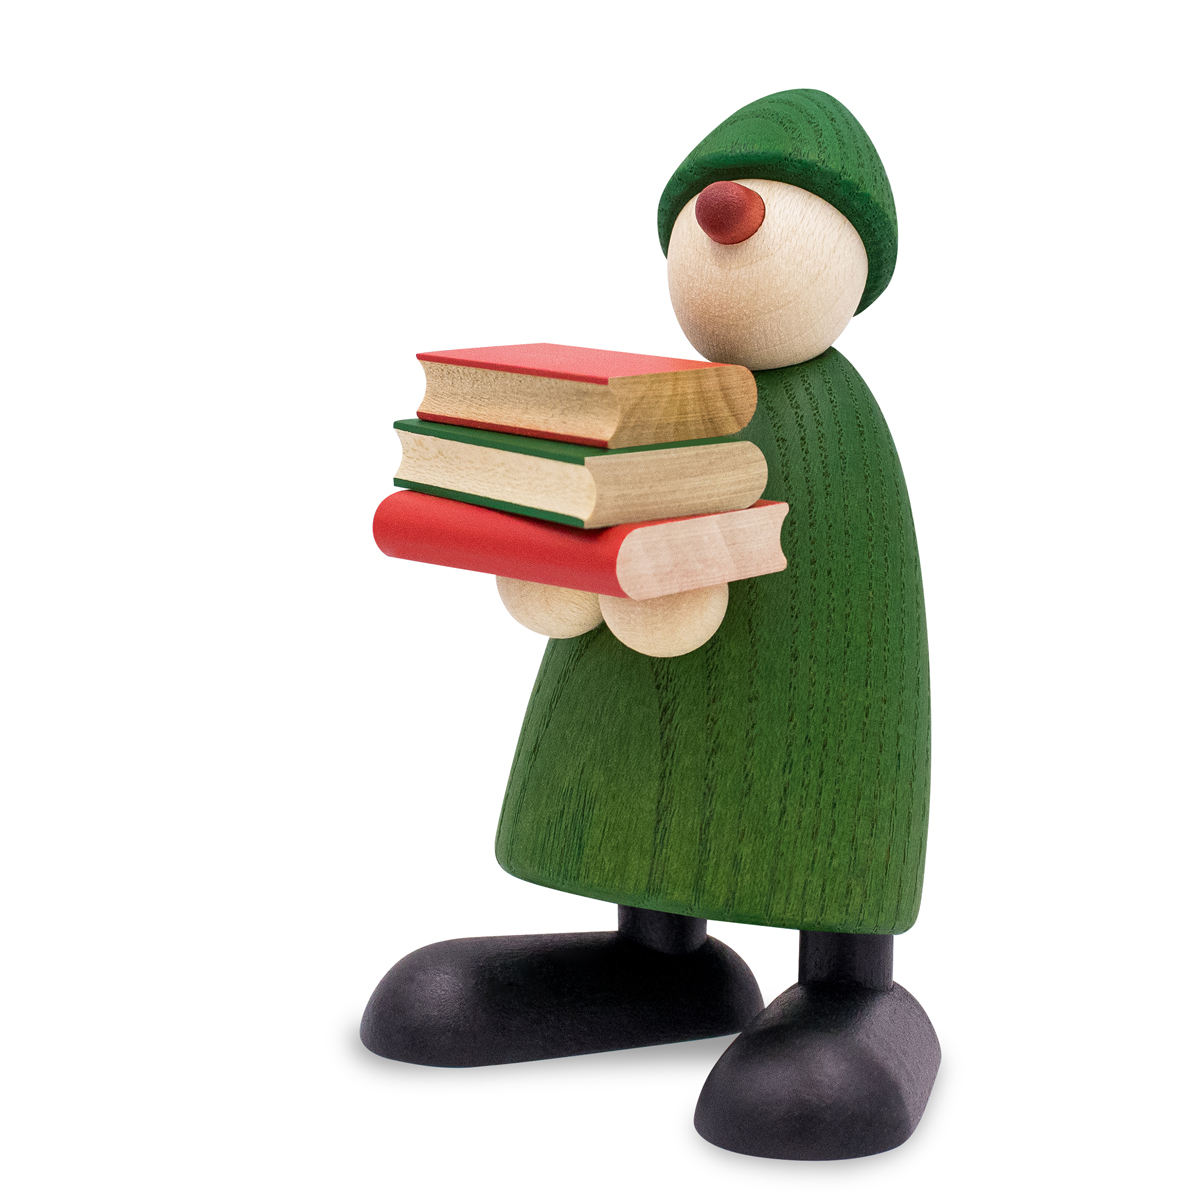 Well-Wisher Billy with books, green